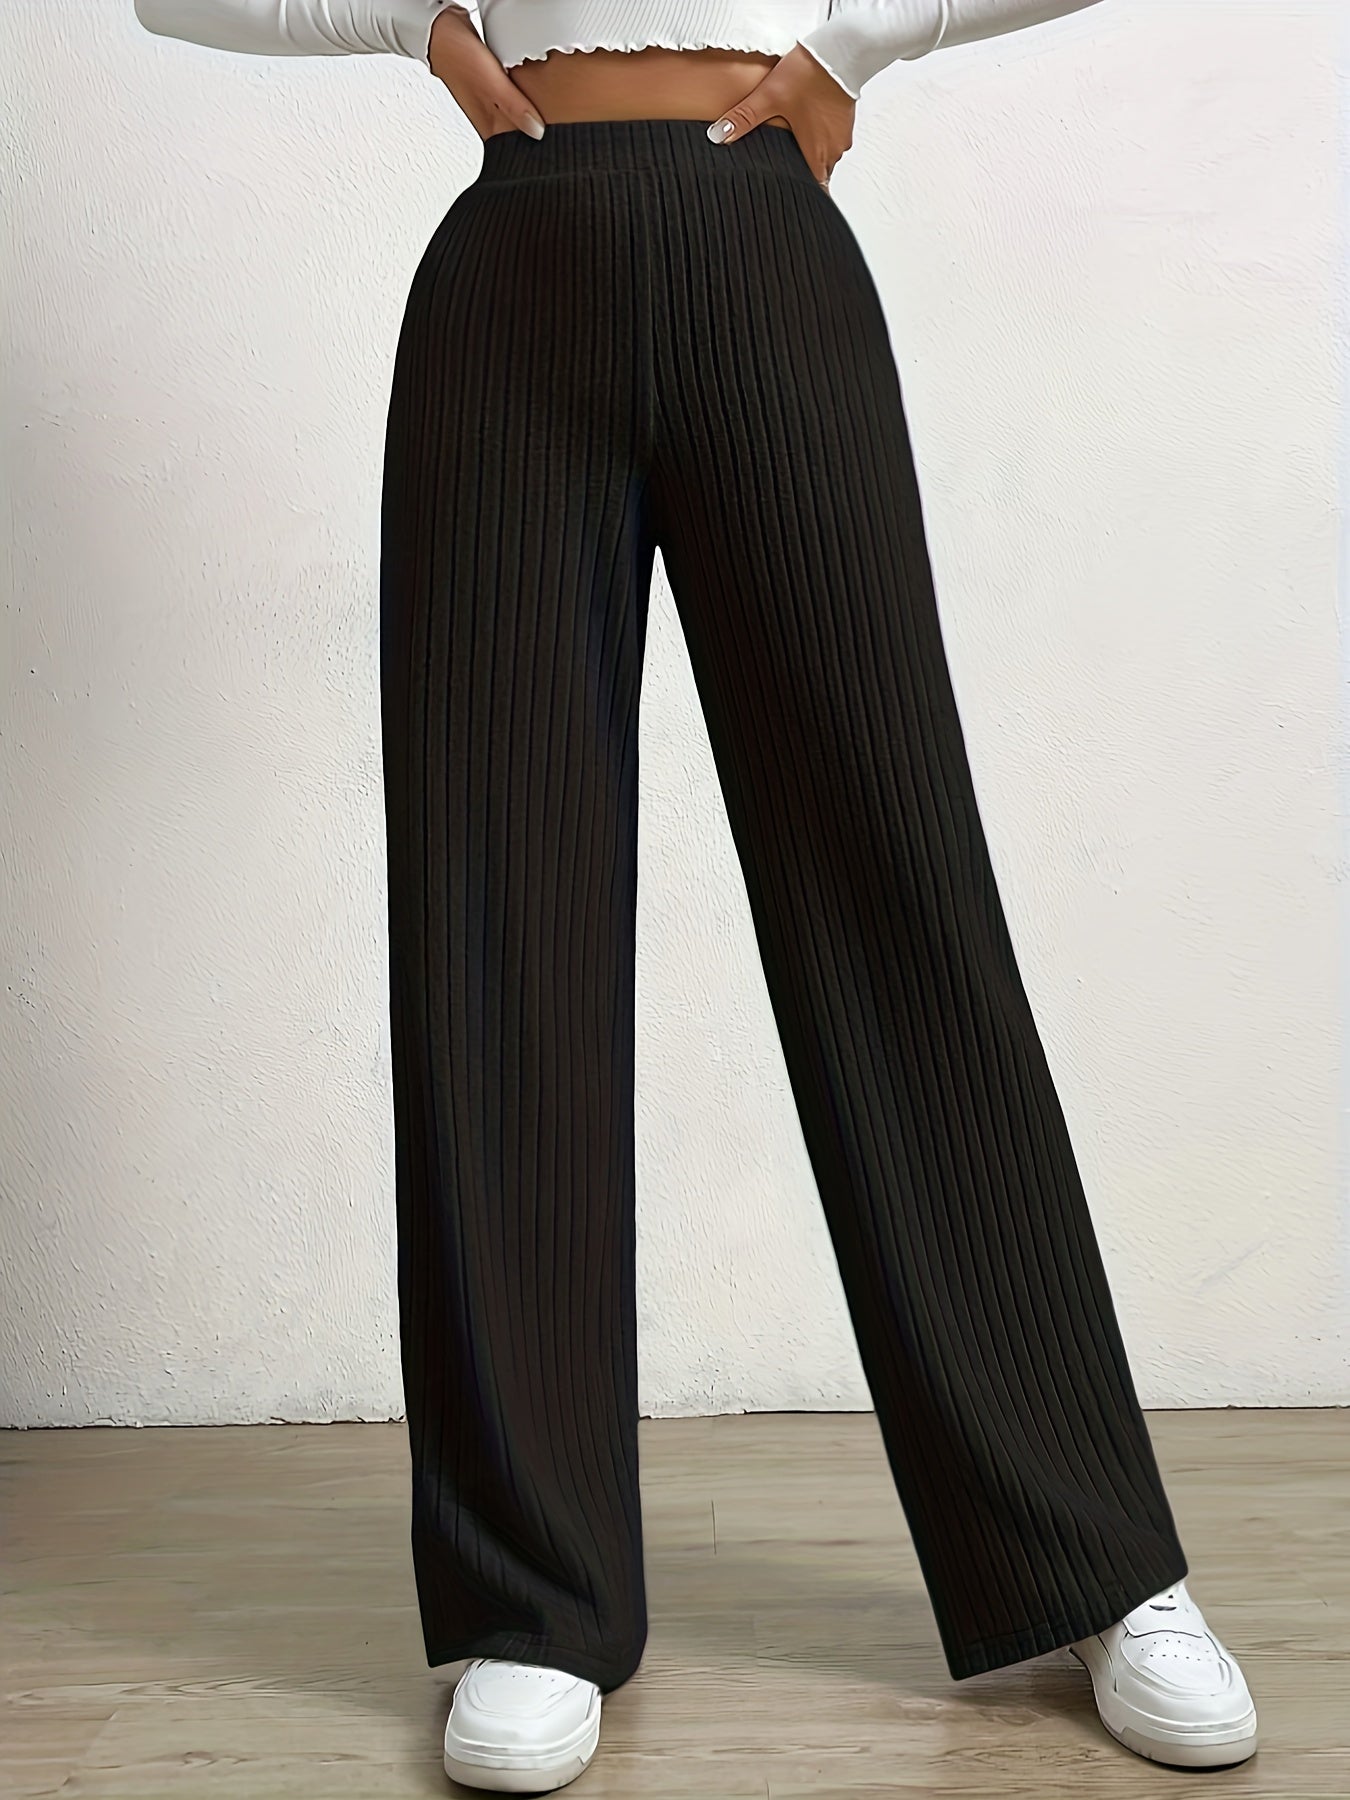 Plus Size Casual Pants, Women's Plus Solid Ribbed High Rise Medium Stretch Wide Leg Trousers